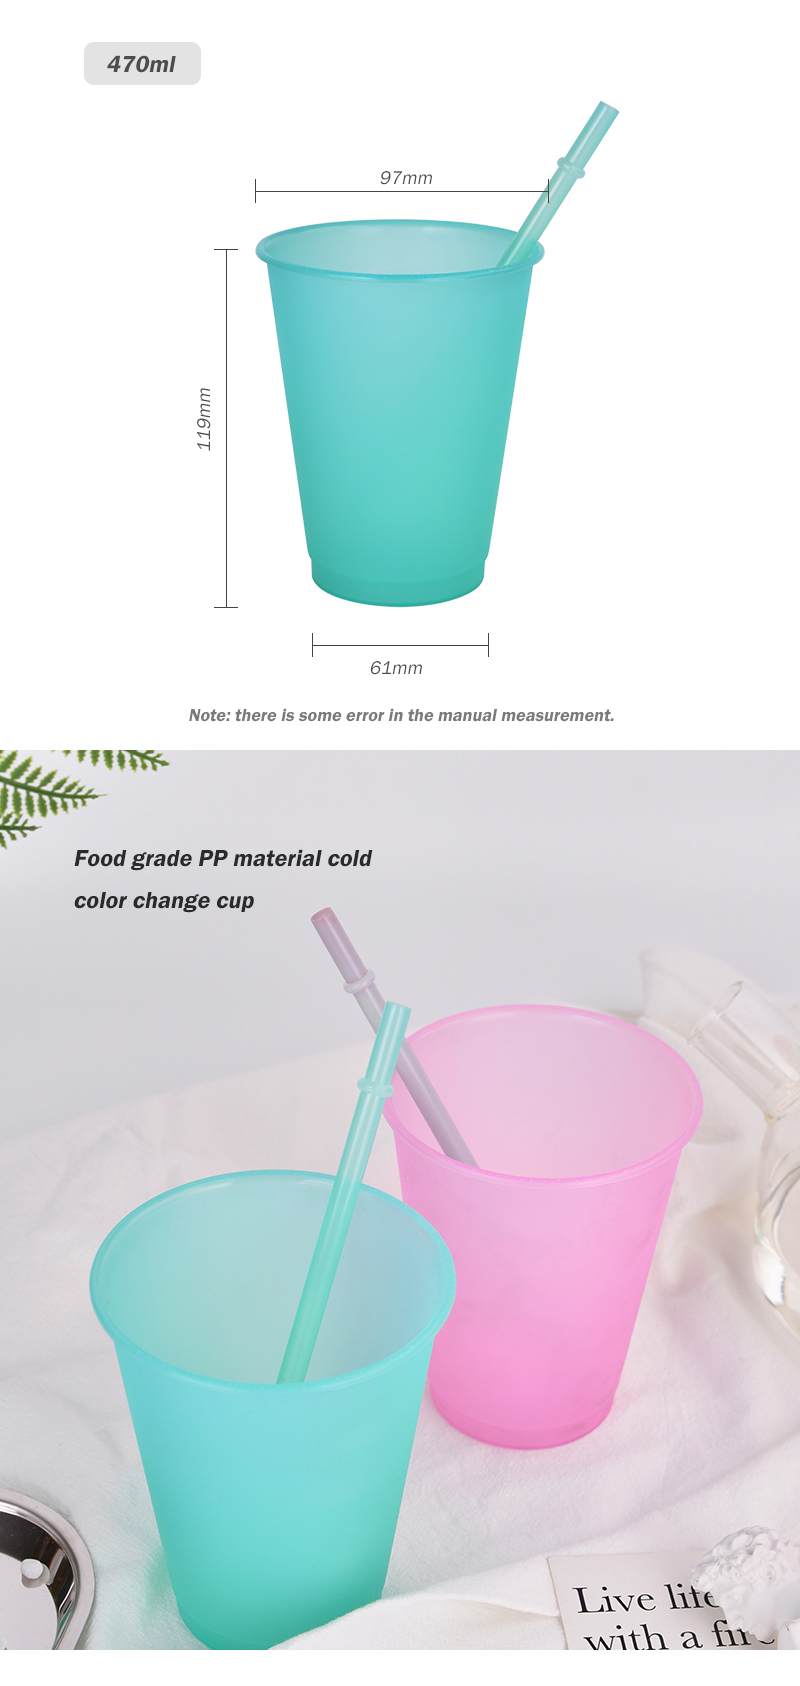 color changing cup